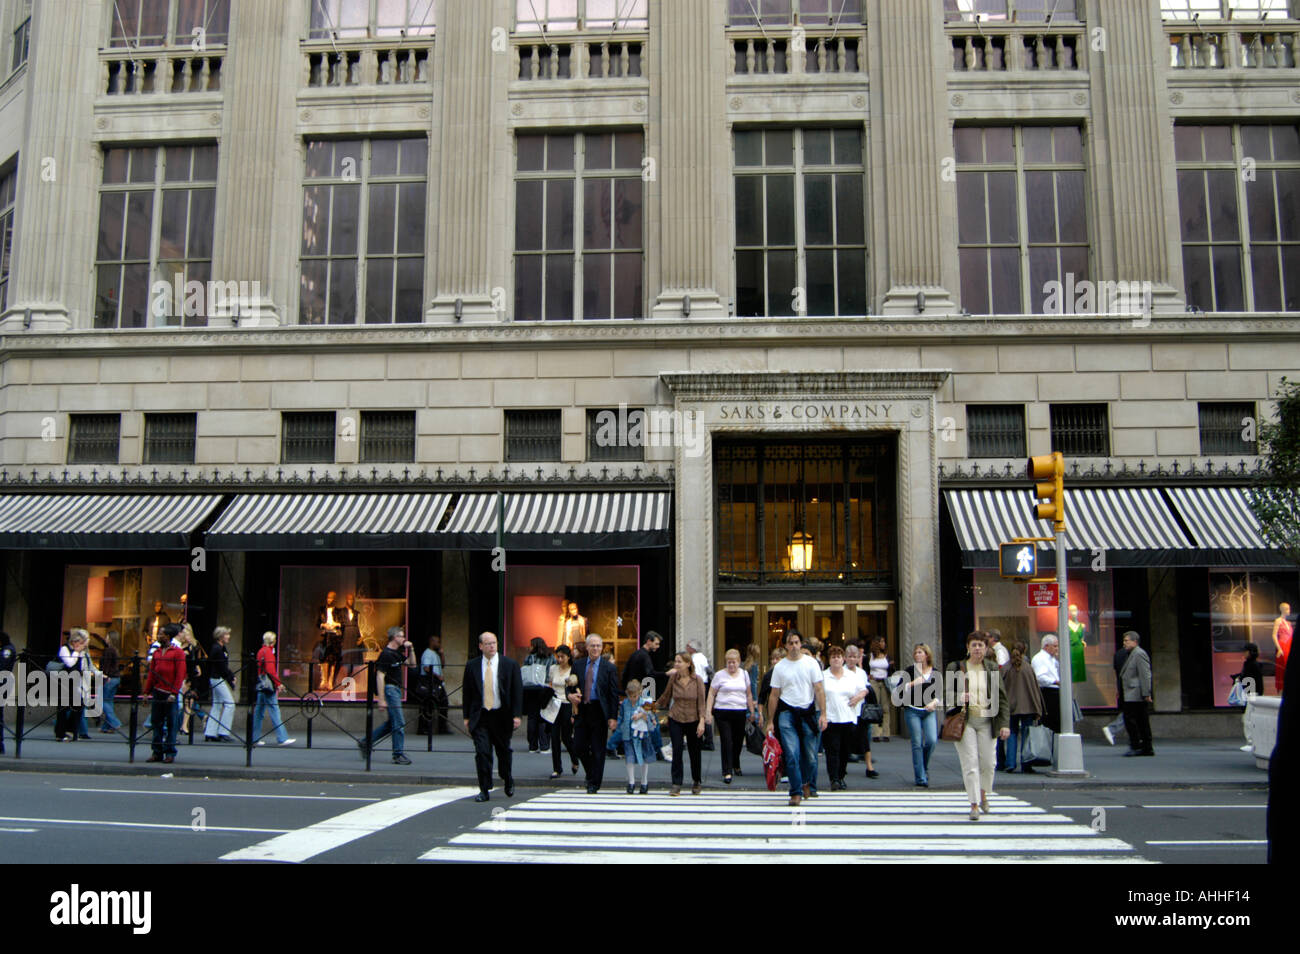 Saks department store on Fifth Avenue, New York City, USA Stock Photo